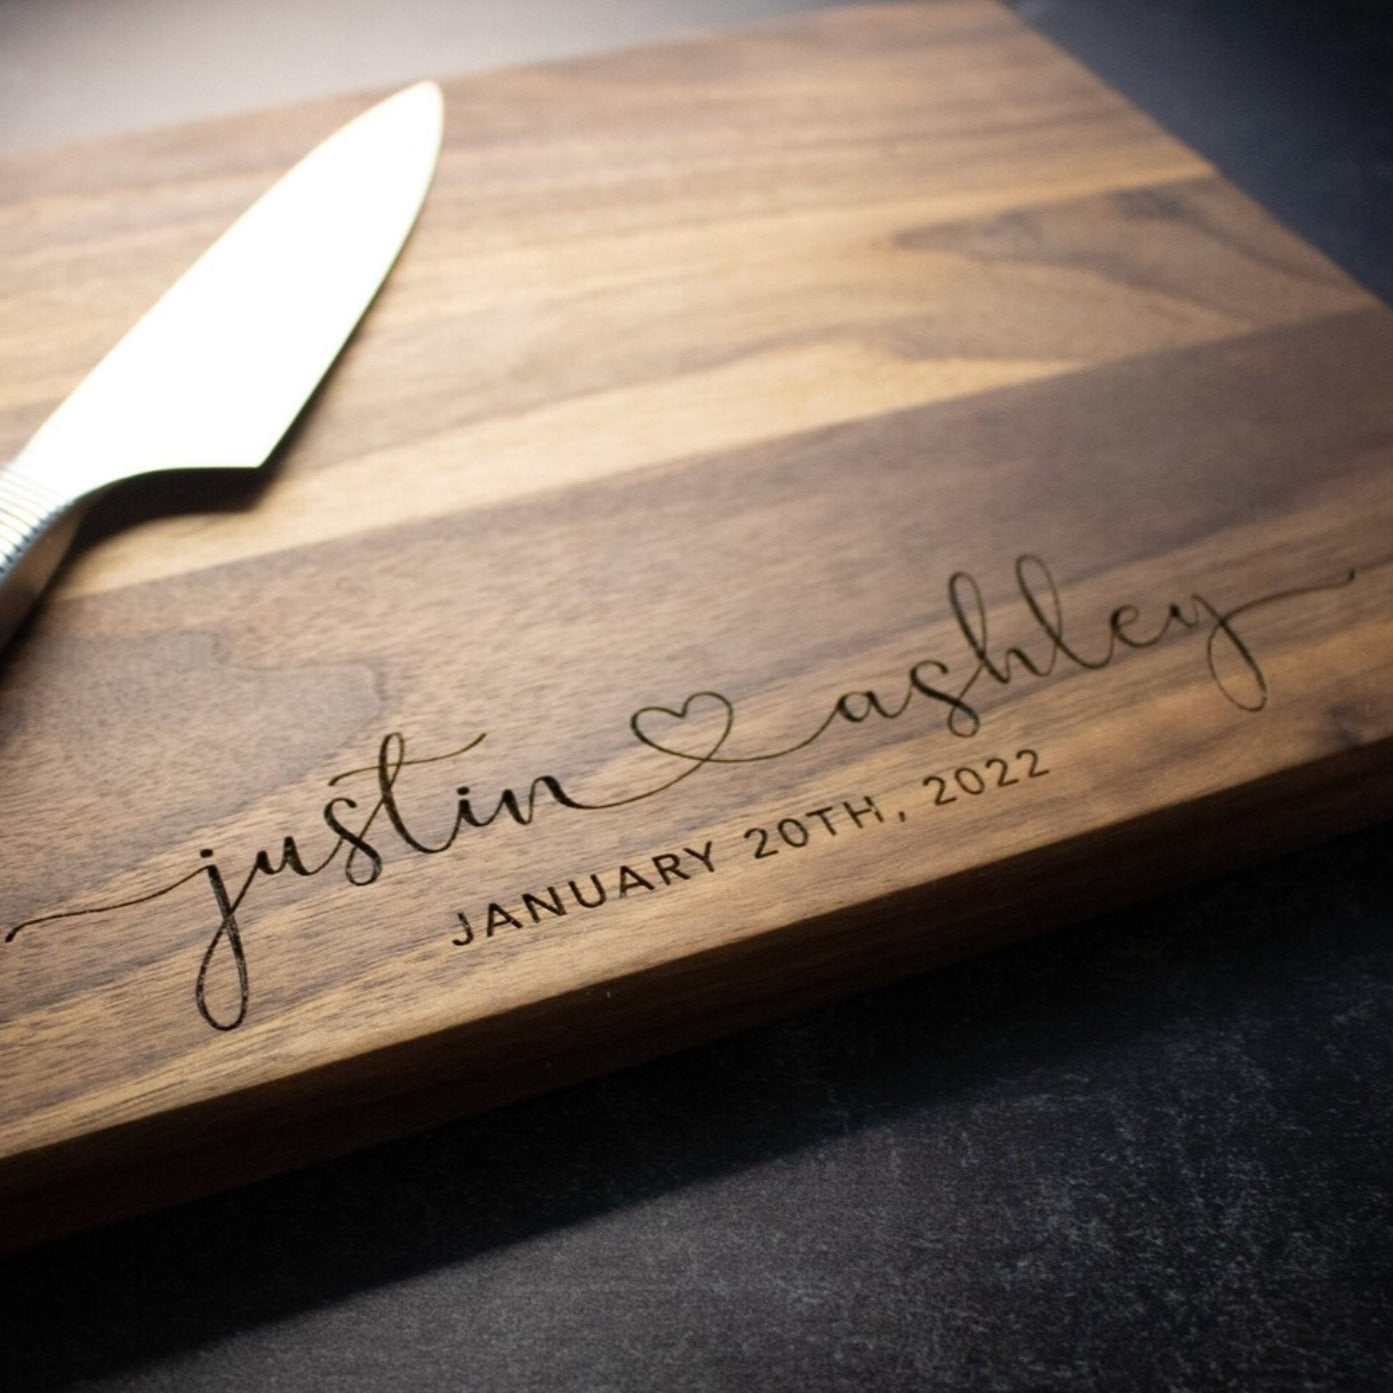 Fish Shaped-Daily Bread Wood Engraved Cutting Board Personalized